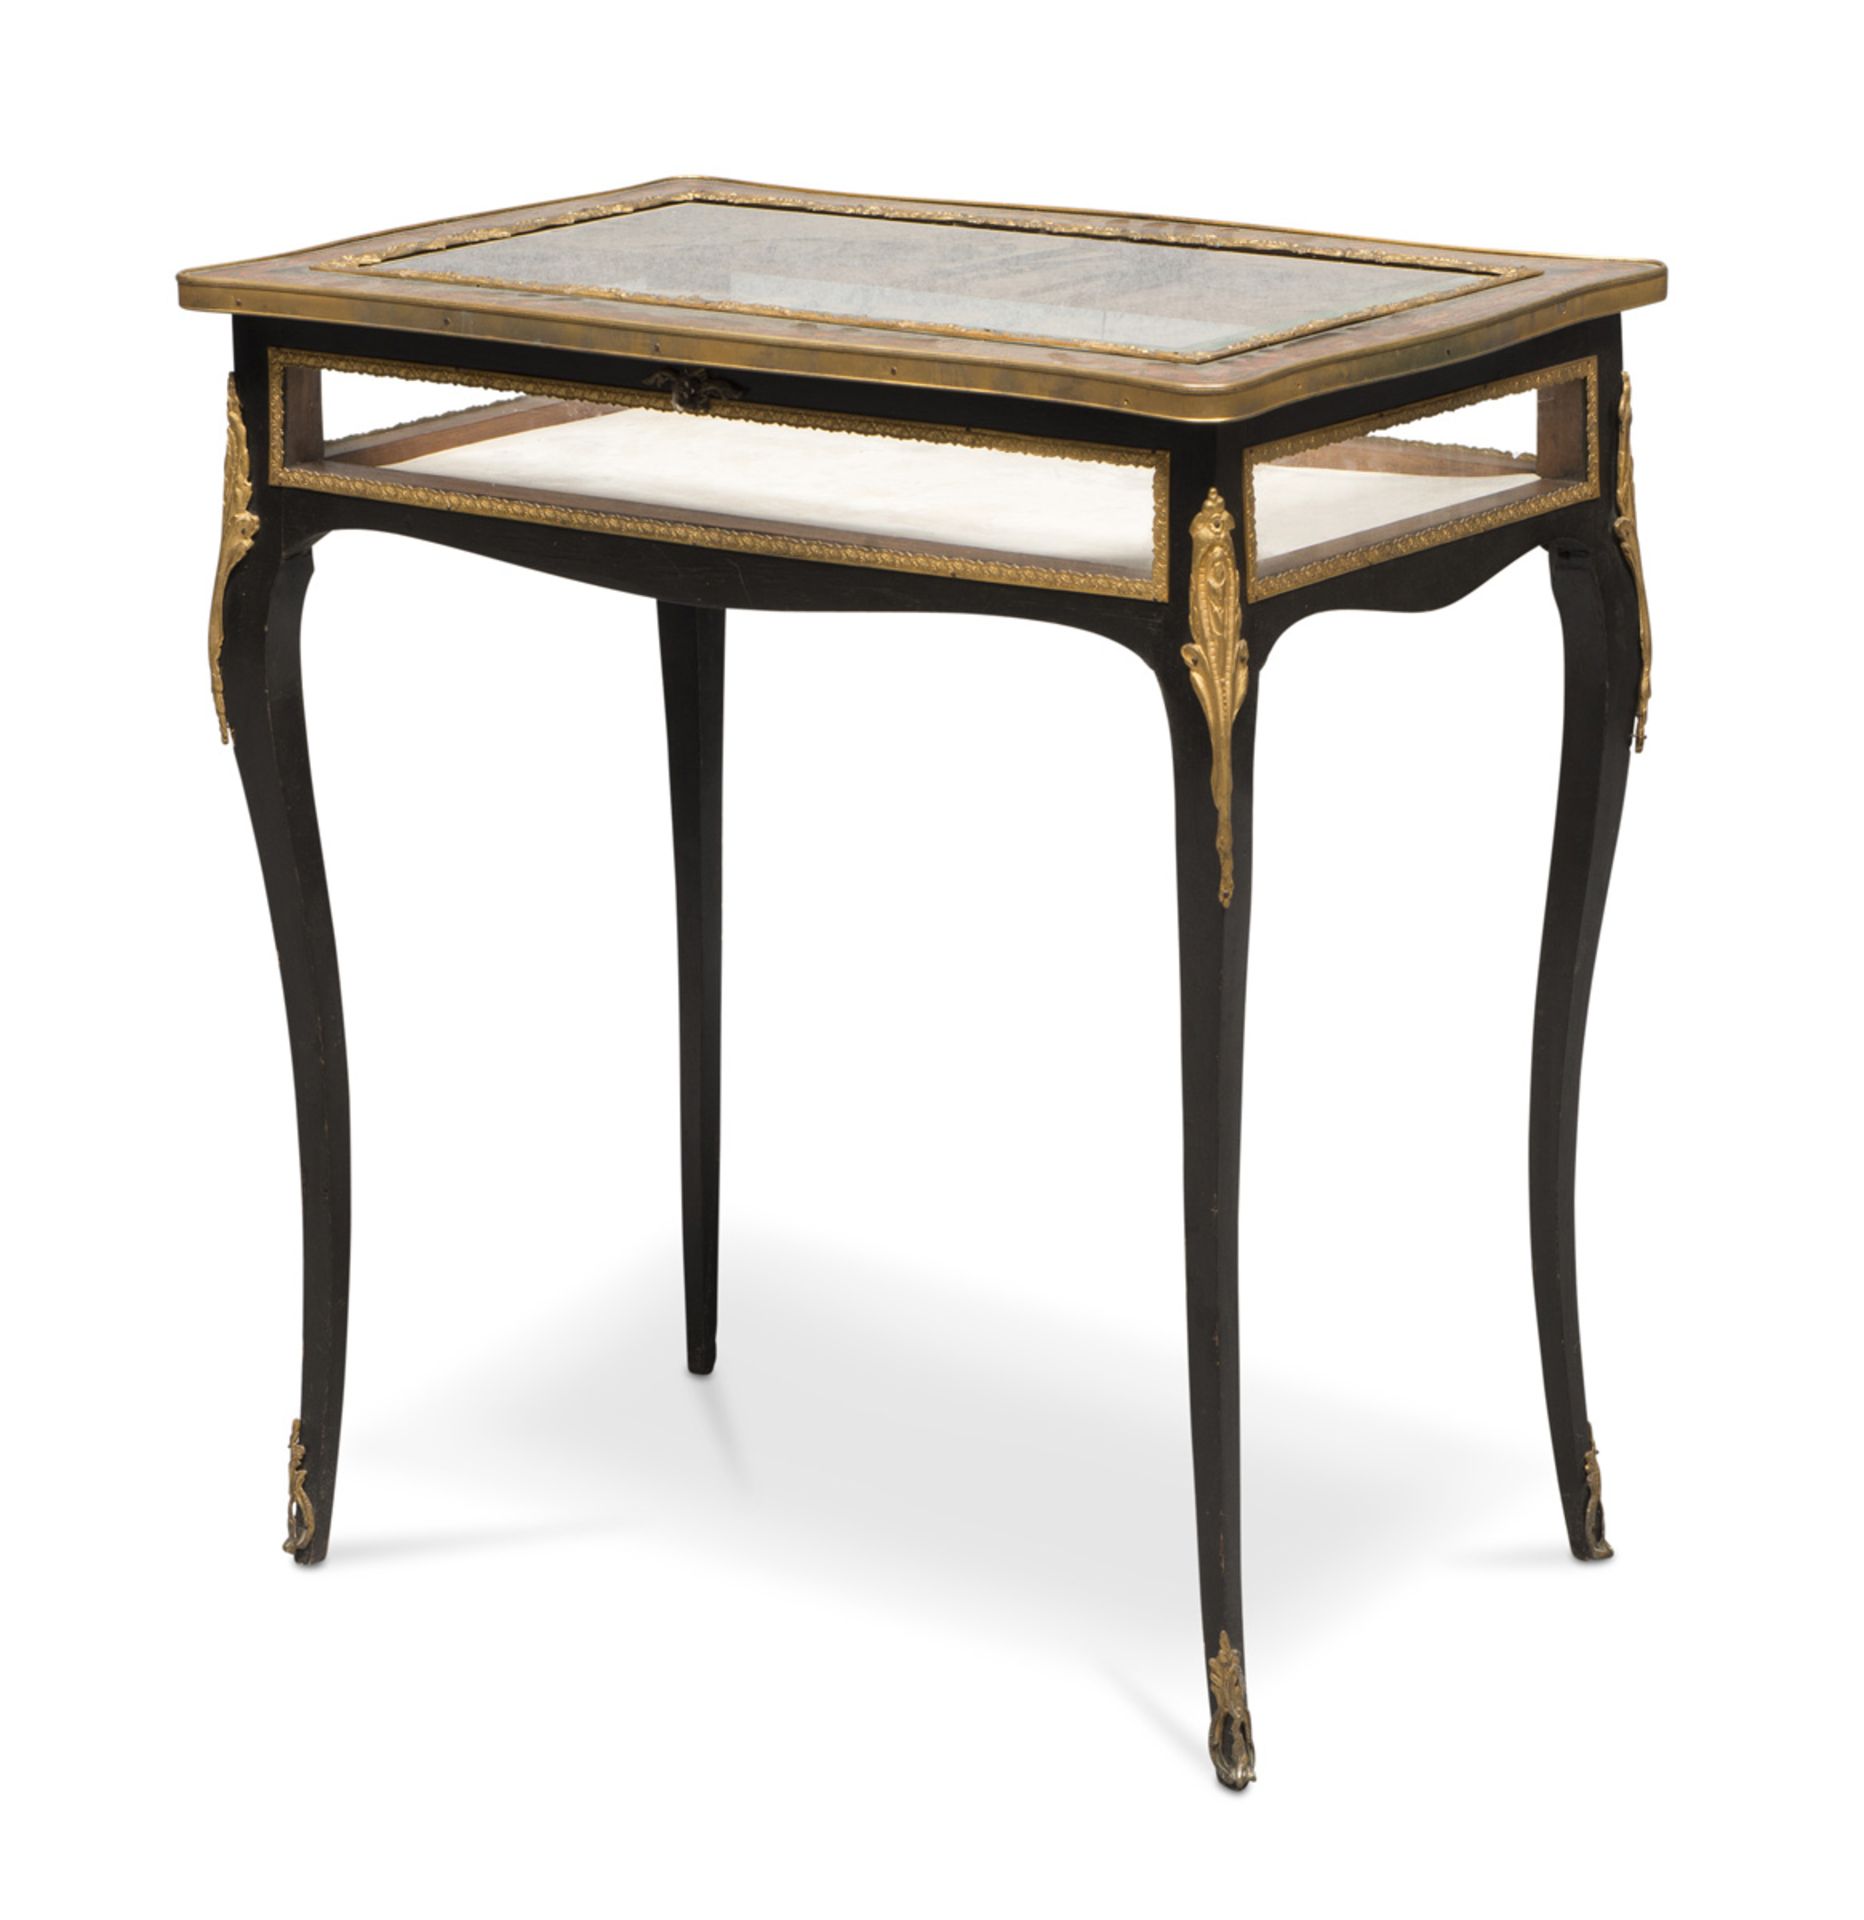 SMALL BOULLE TABLE, FRANCE 19TH CENTURY plated in ebony and red turtle, with inlays in brass.